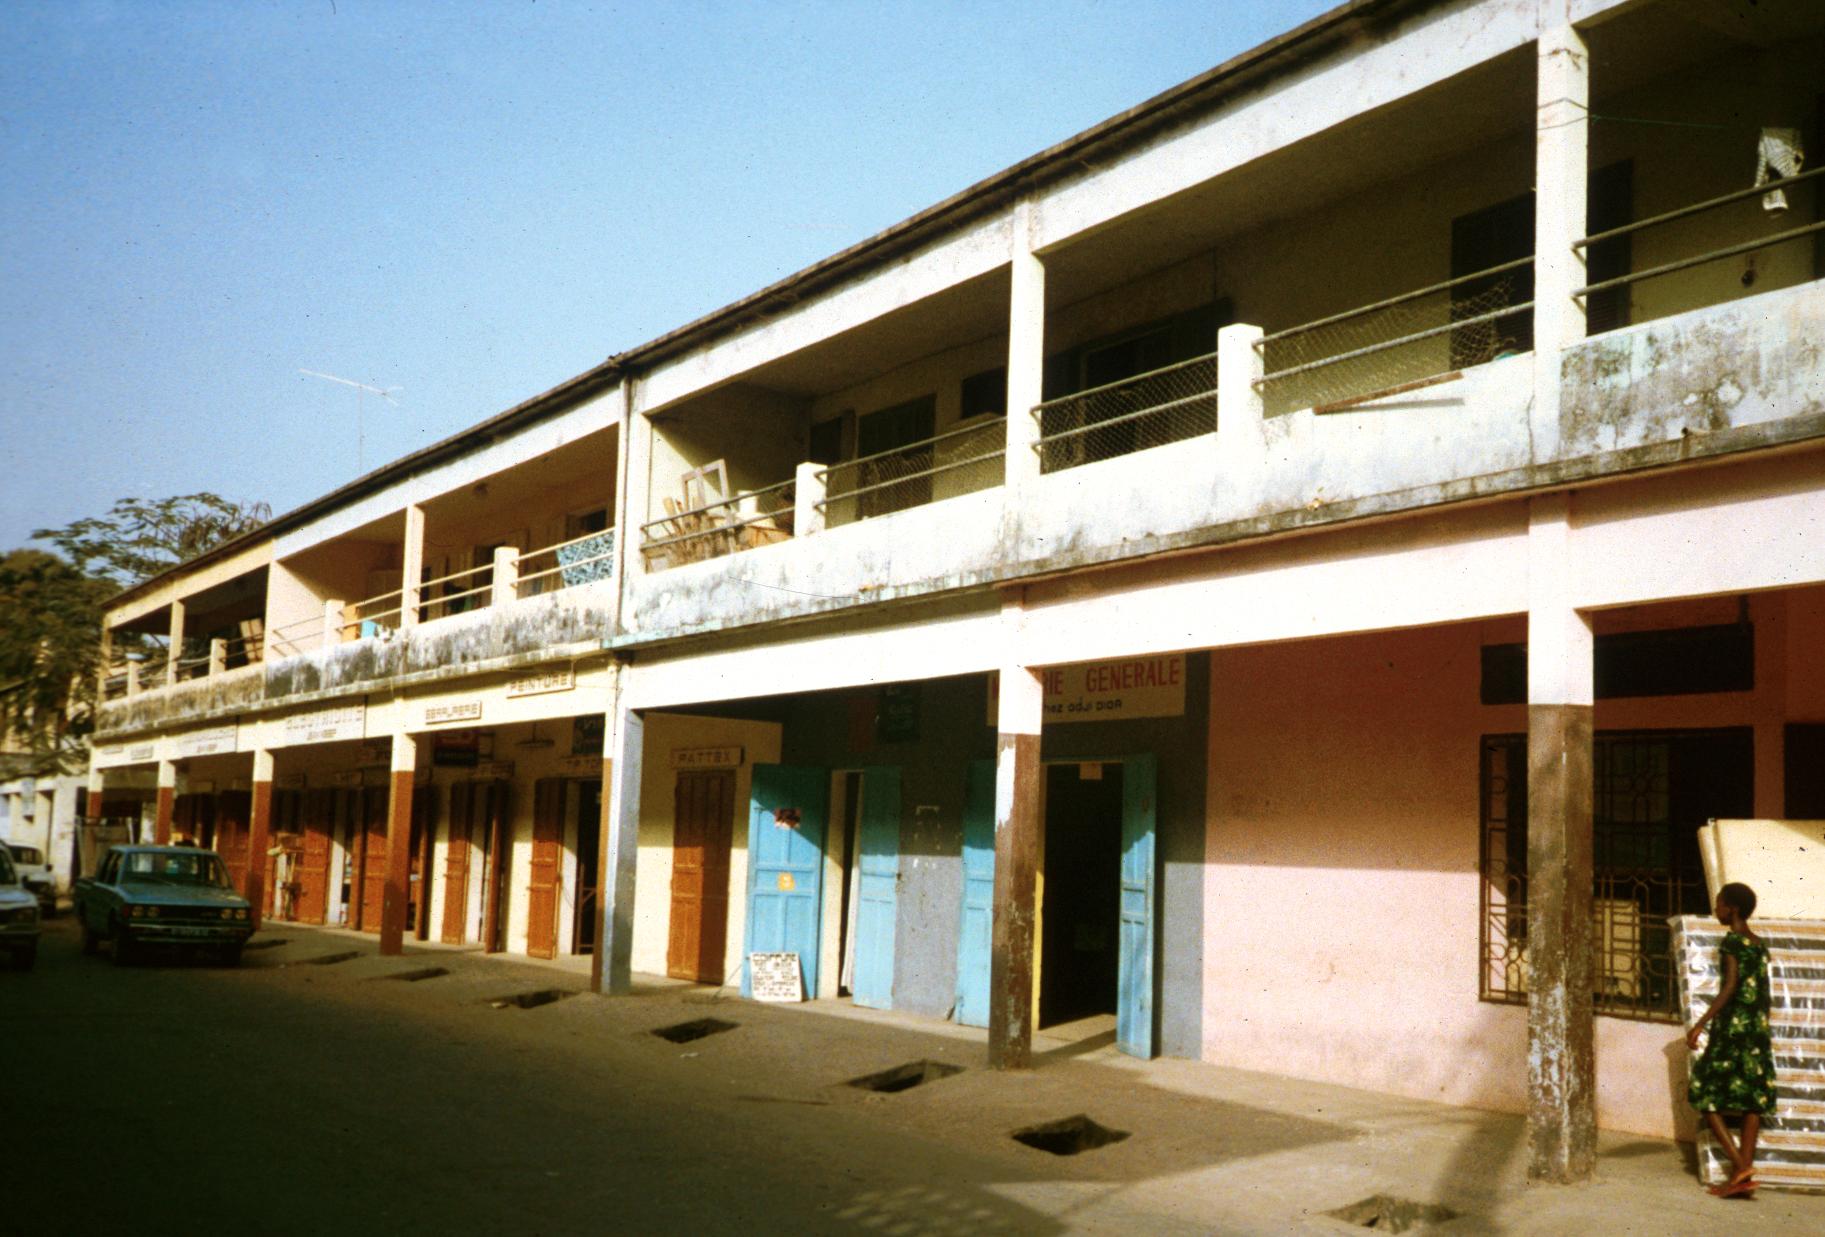 Storefronts Lining a Main Street in Ziguinchor, the Capital of the Casamance Area